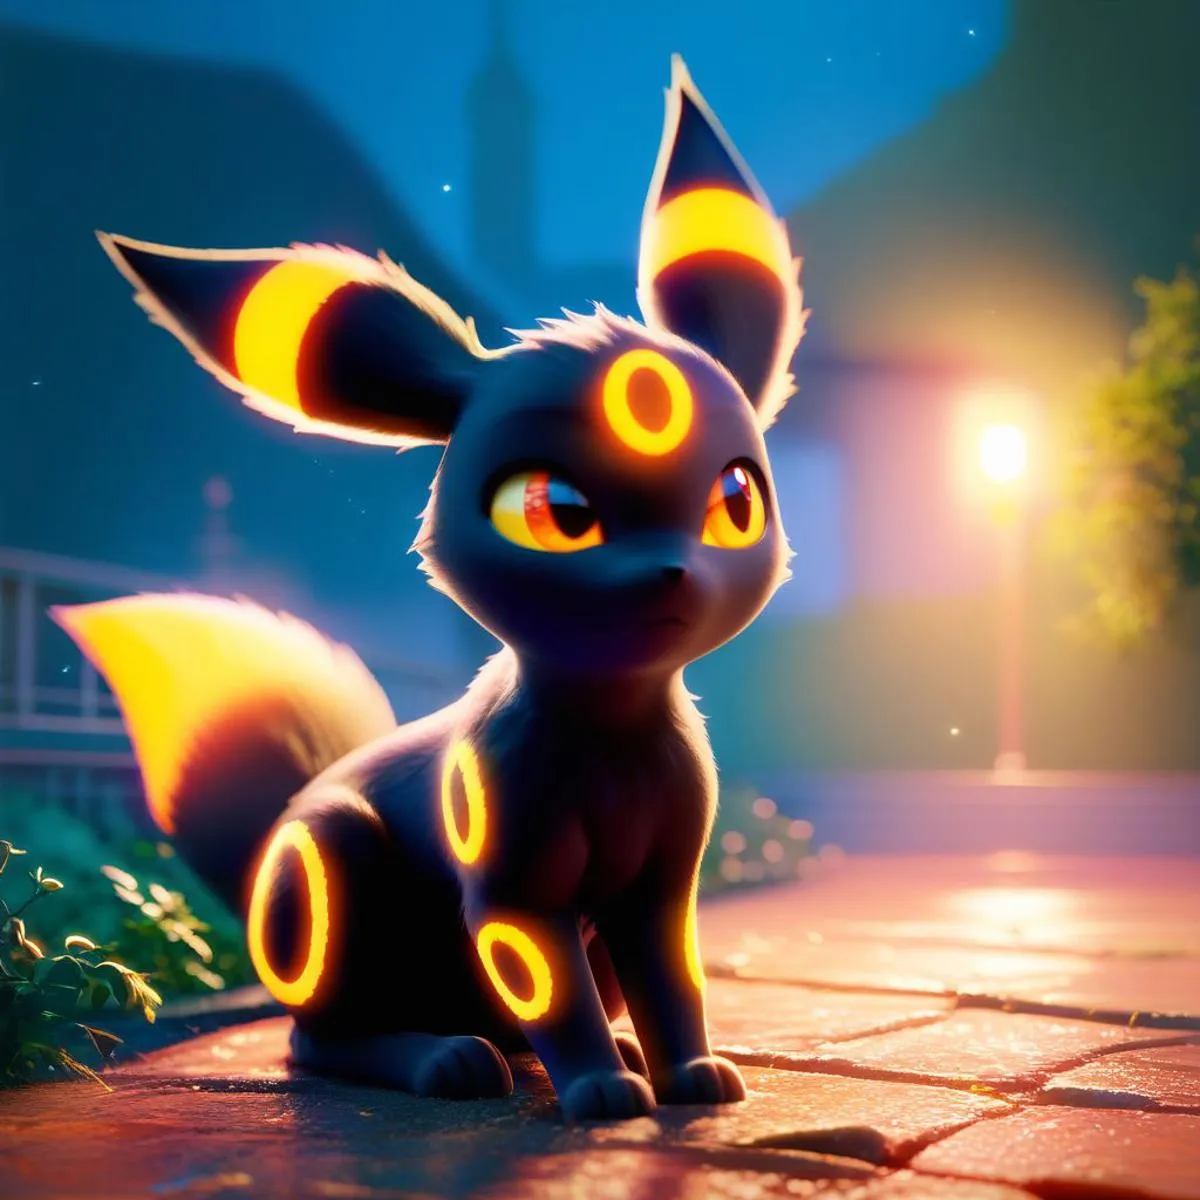 AI generated image of a cute luminescent cat with glowing rings on its body and ears, sitting on a pathway at night using Stable Diffusion.